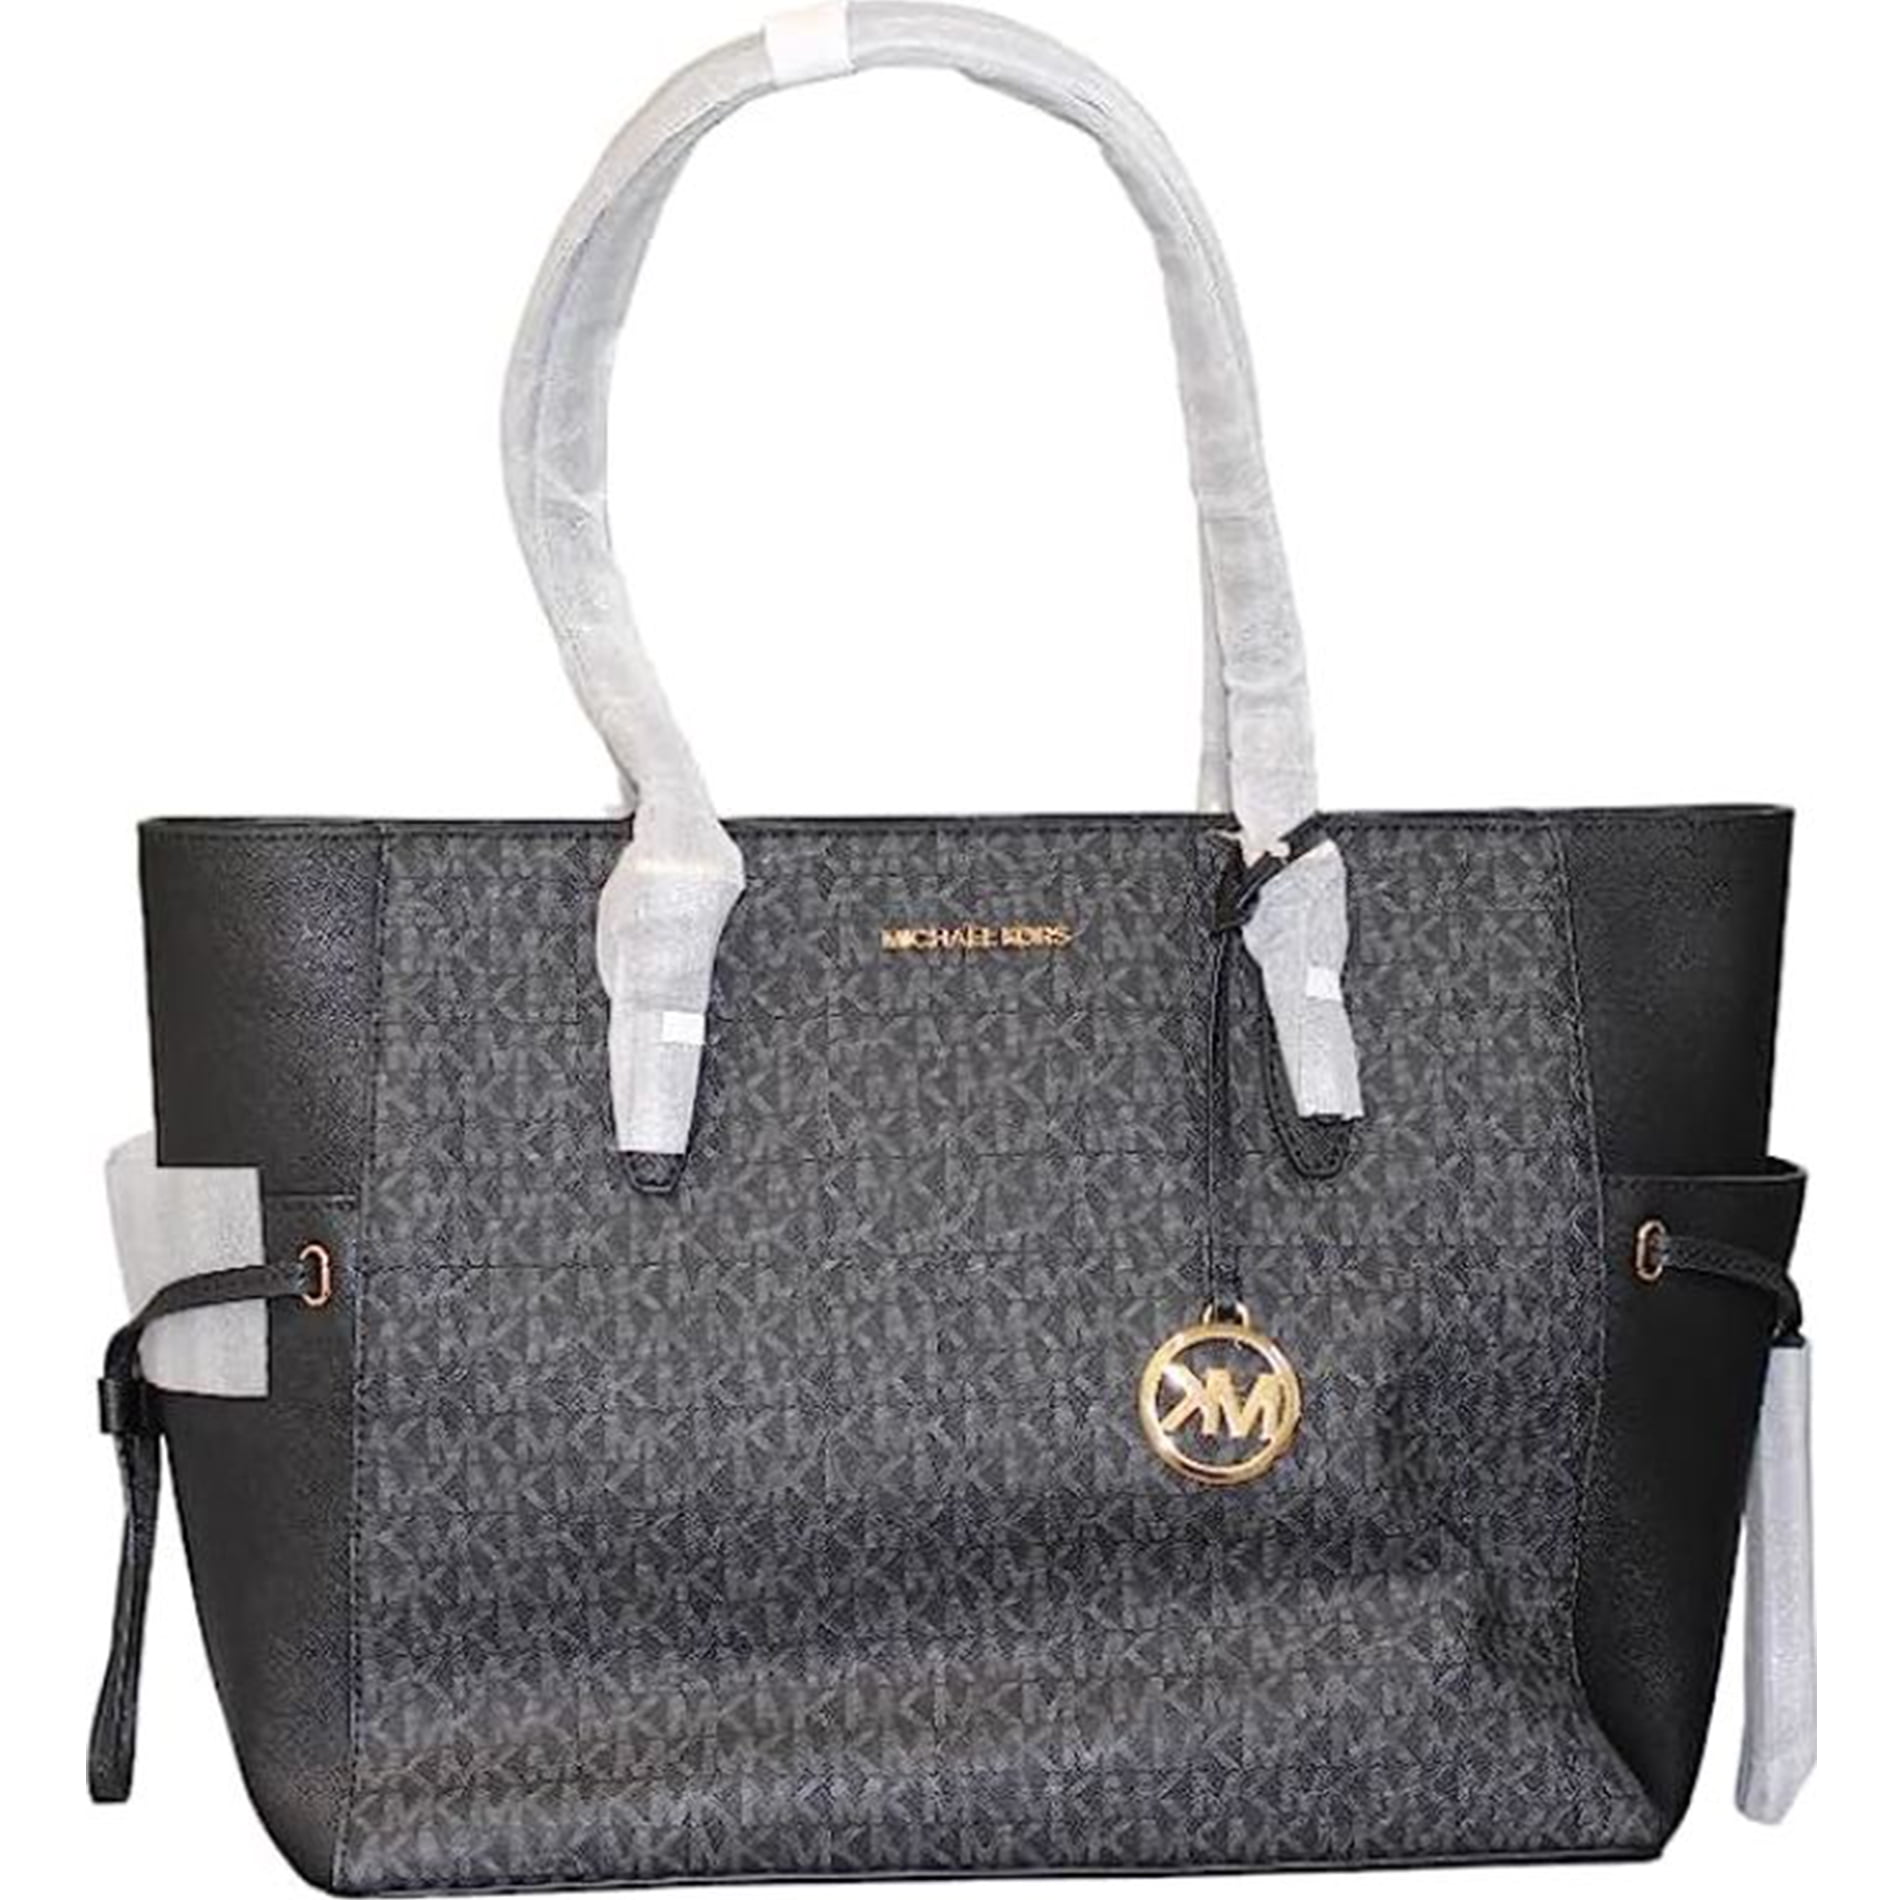 MICHAEL Michael Kors Jet Set Travel Studded Tote in Brown